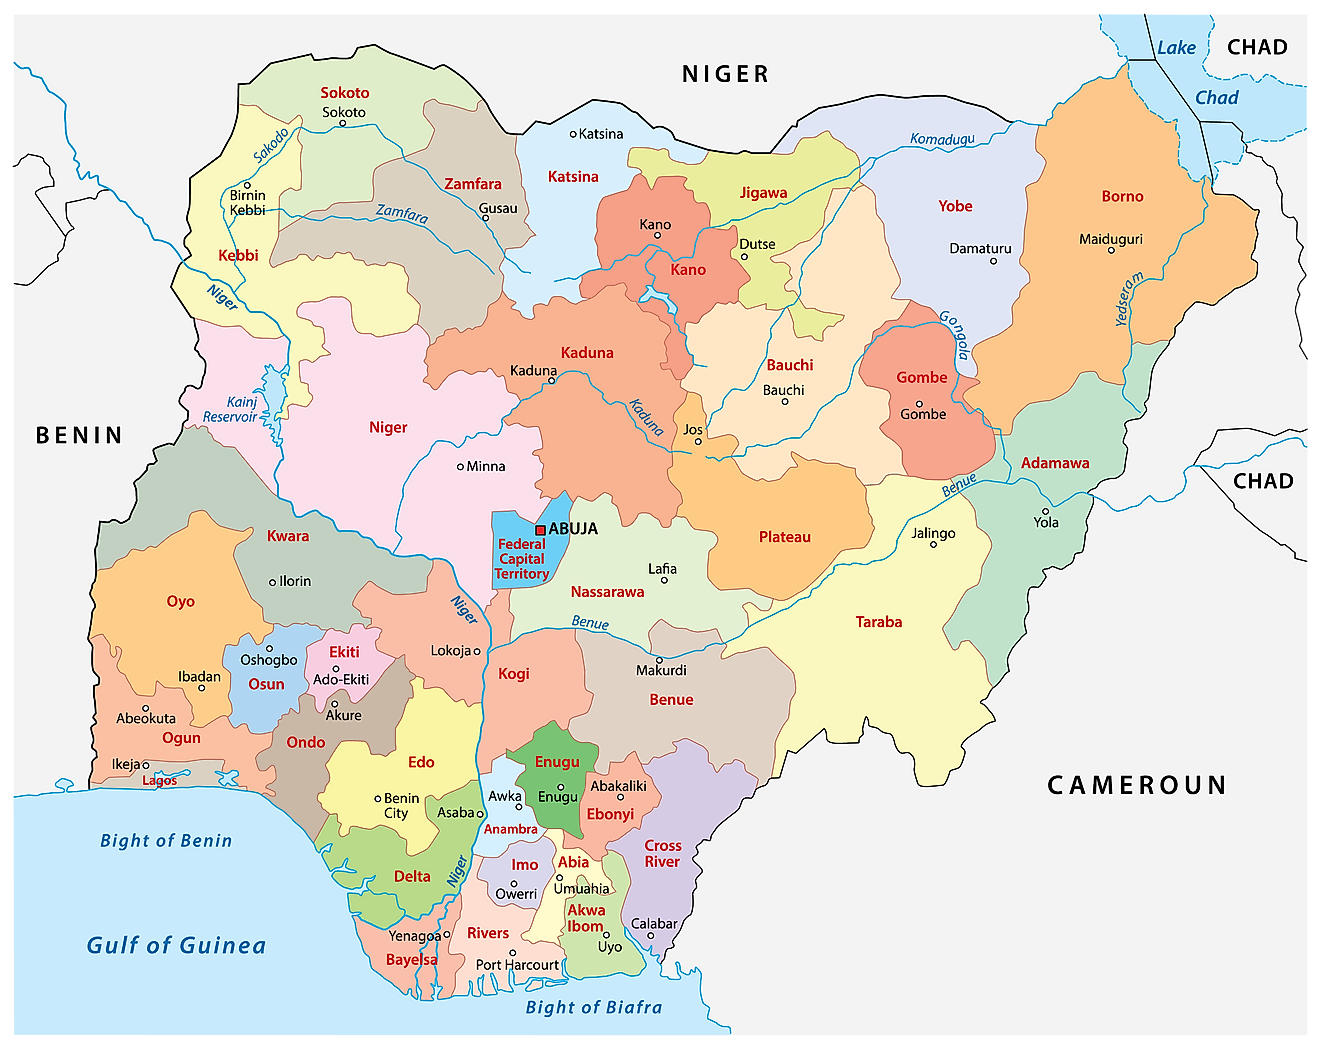 Nigeria Maps And Facts World Atlas